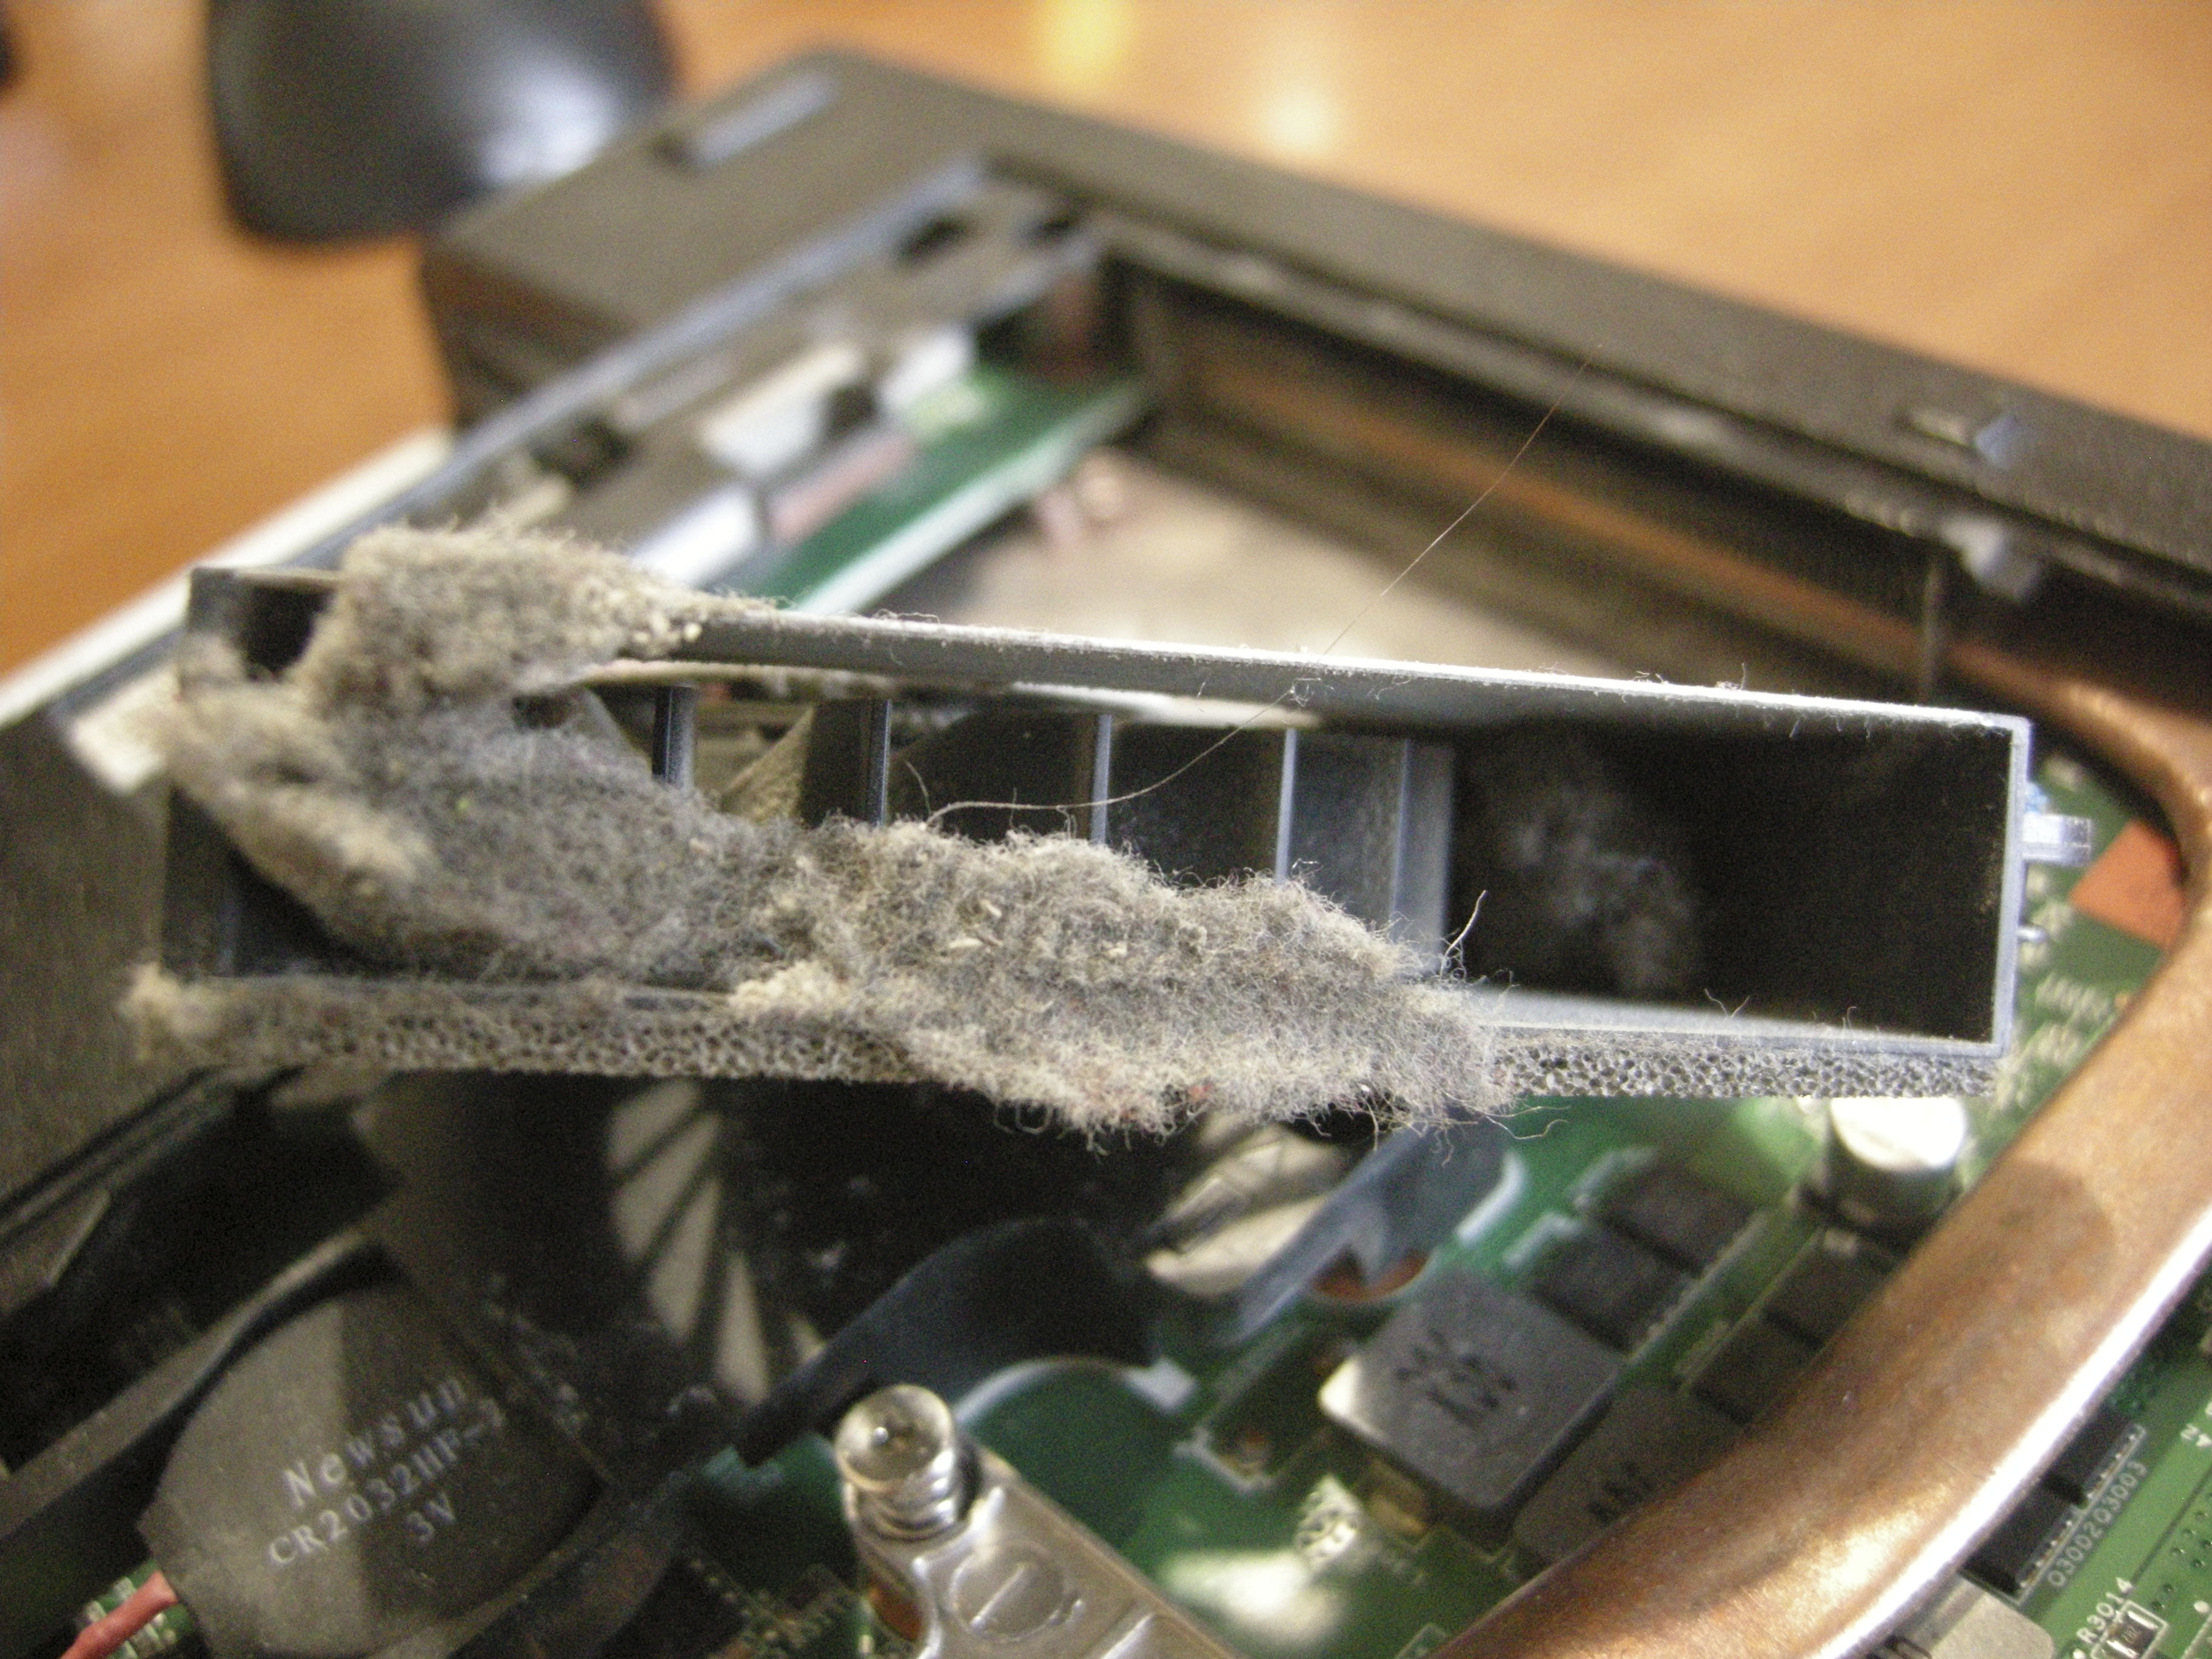 How To Fix An Overheating Laptop Explain By Example